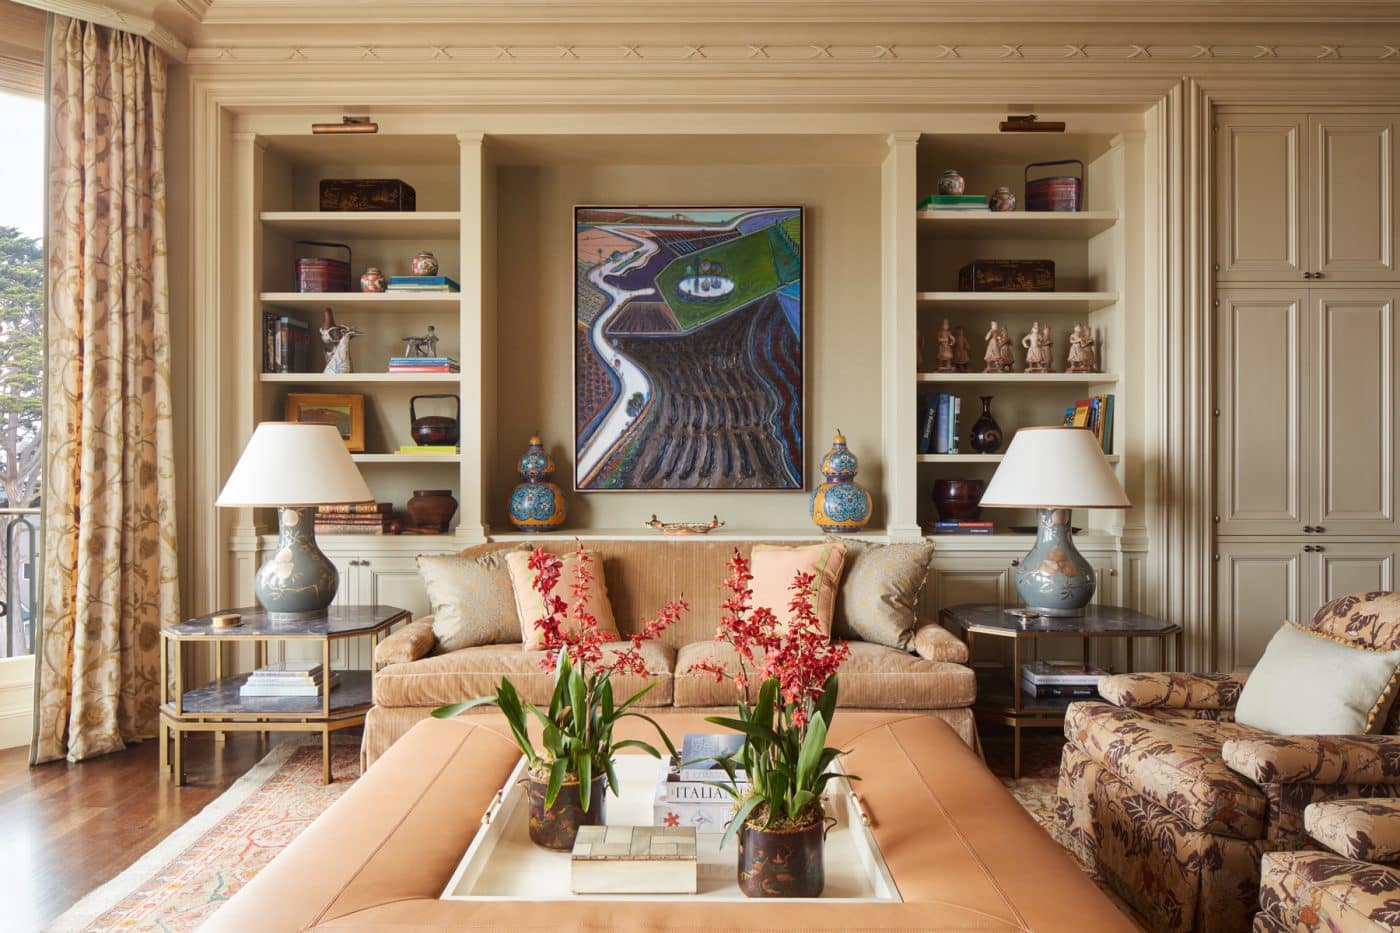 San Francisco neoclassical mansion sitting room by interior designer Suzanne Tucker with Wayne Thiebaud abstract painting